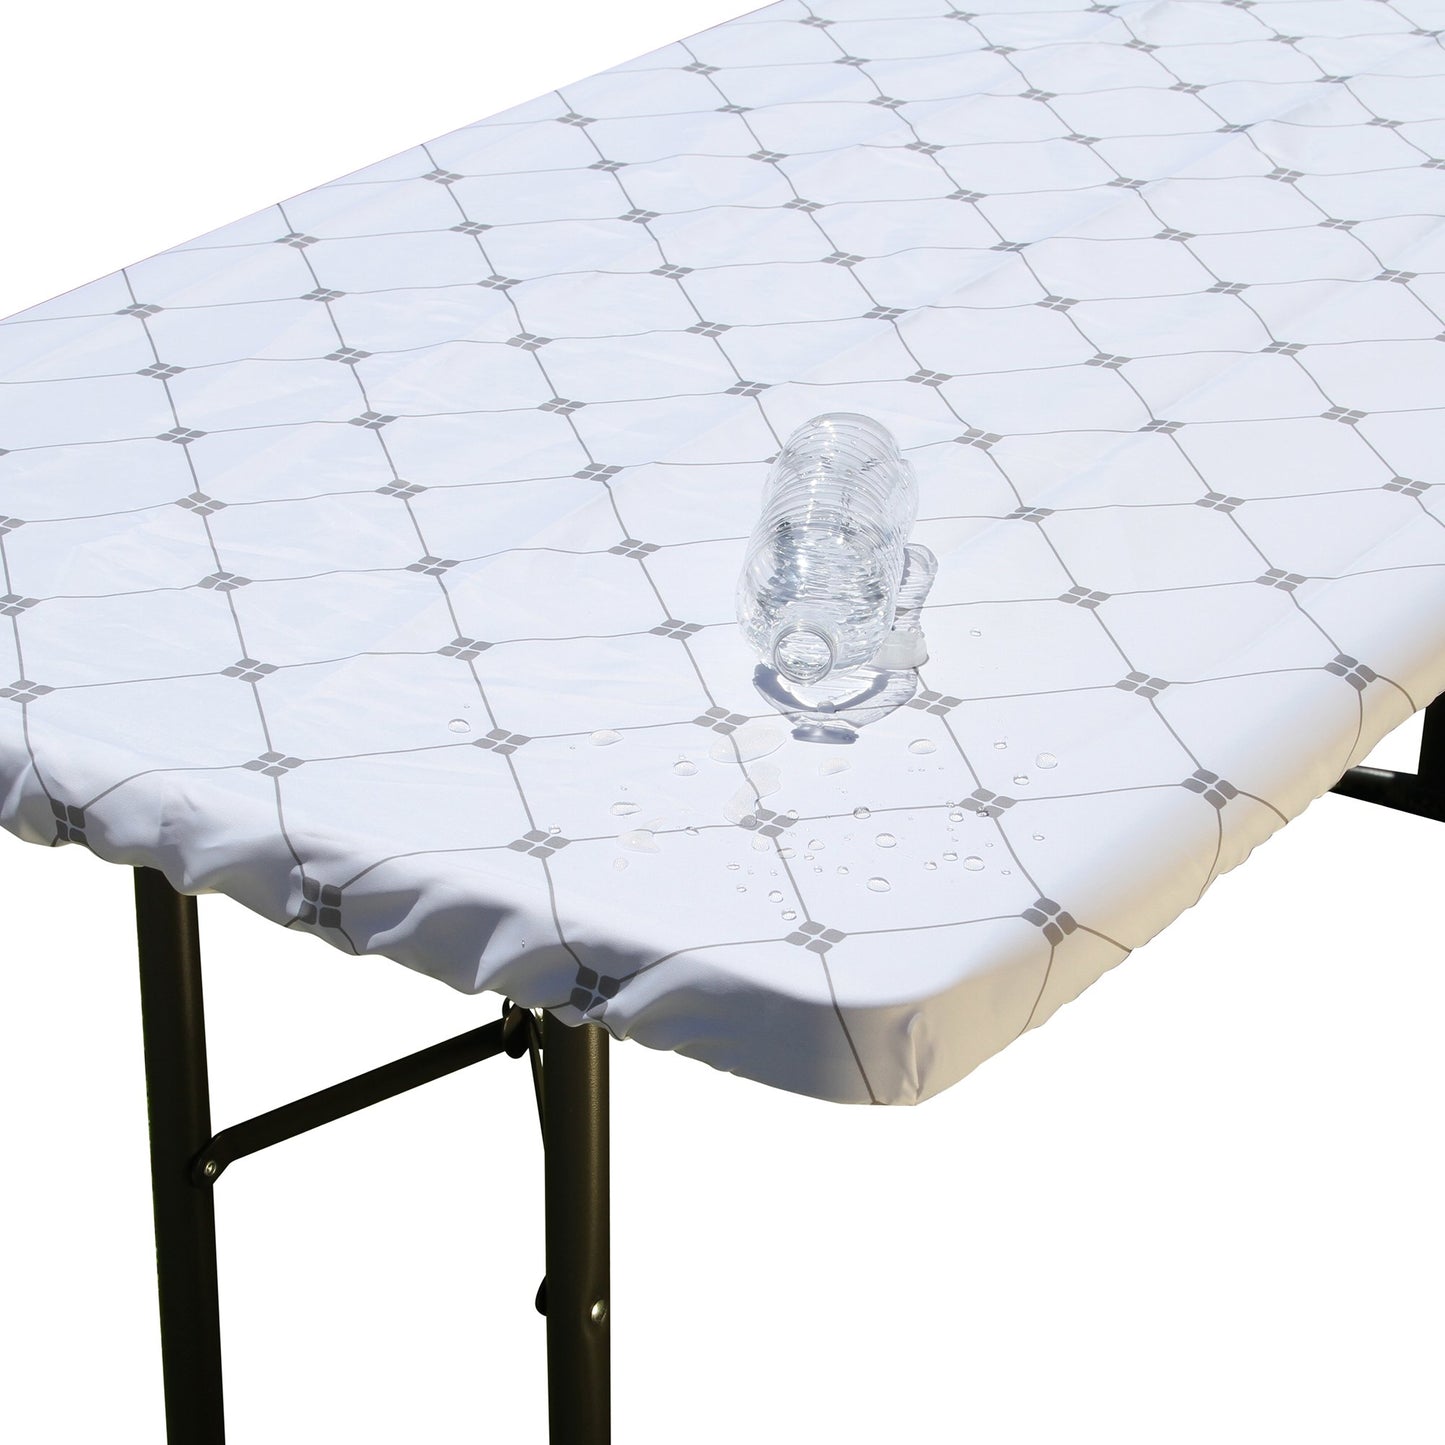 Water beading up on the water resistant surface of TableCloth PLUS 72" Diamonds Polyester Tablecloth for 6' Folding Tables